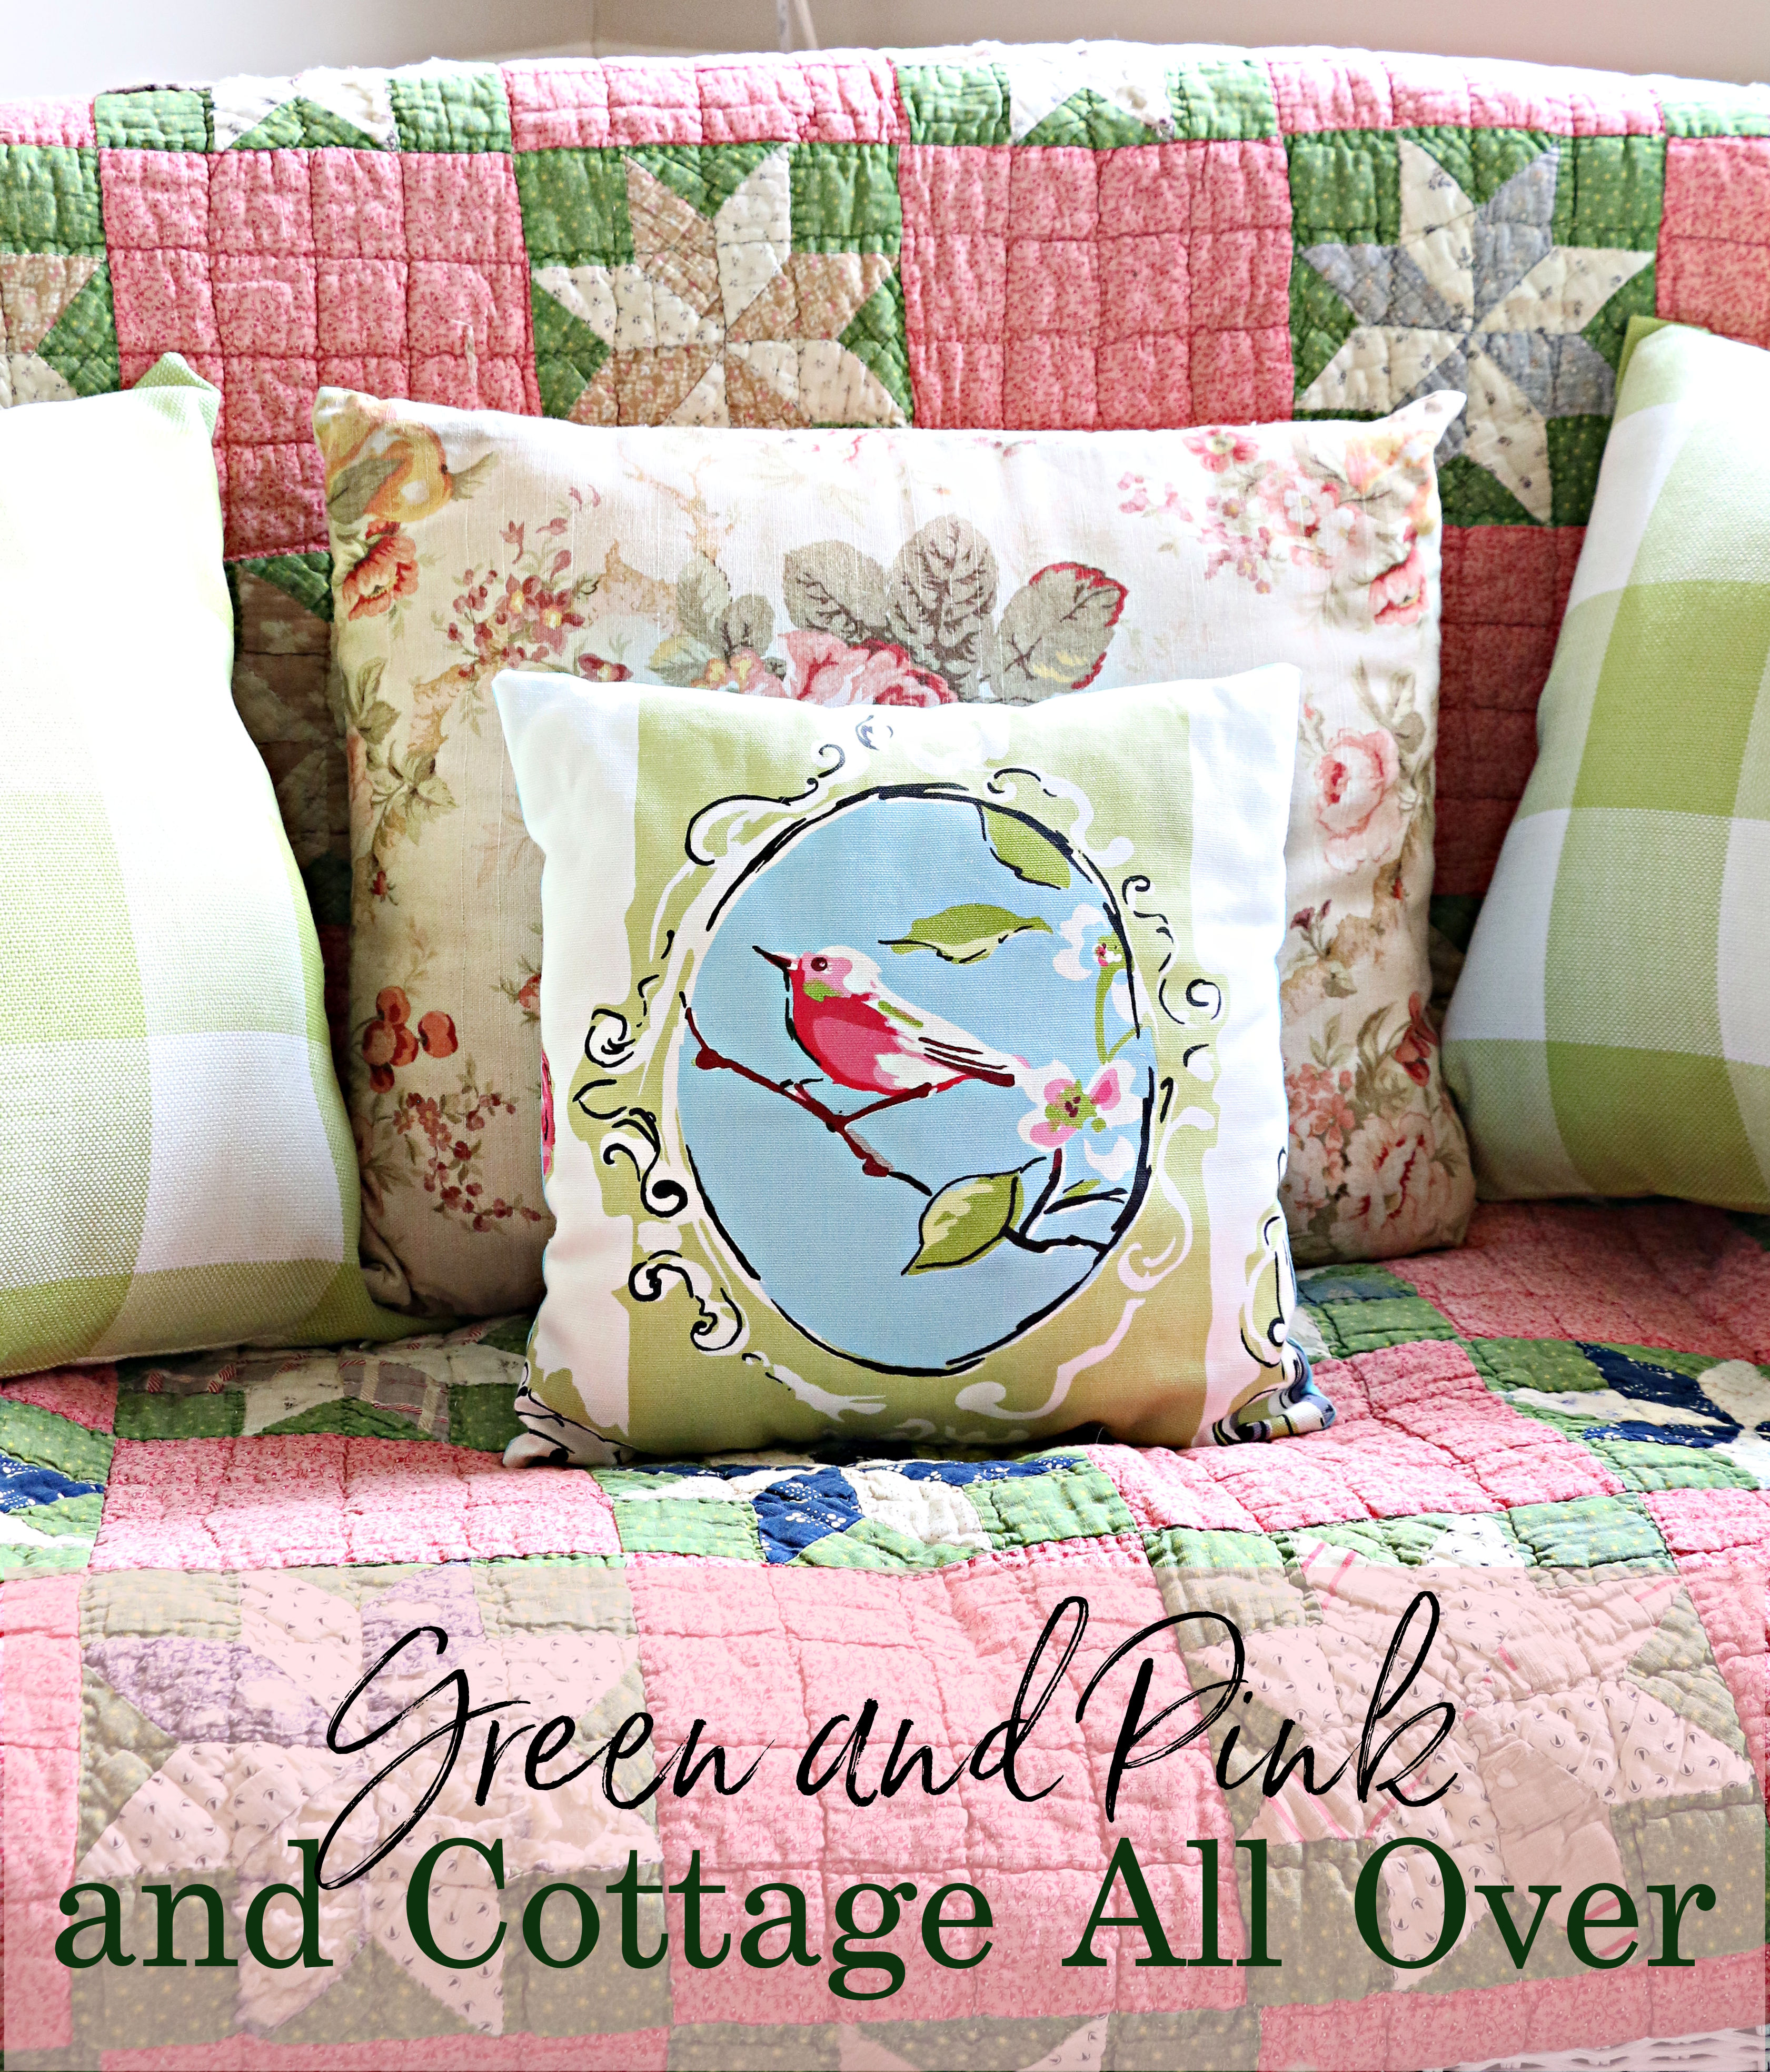 common ground : Green and Pink and Cottage All Over